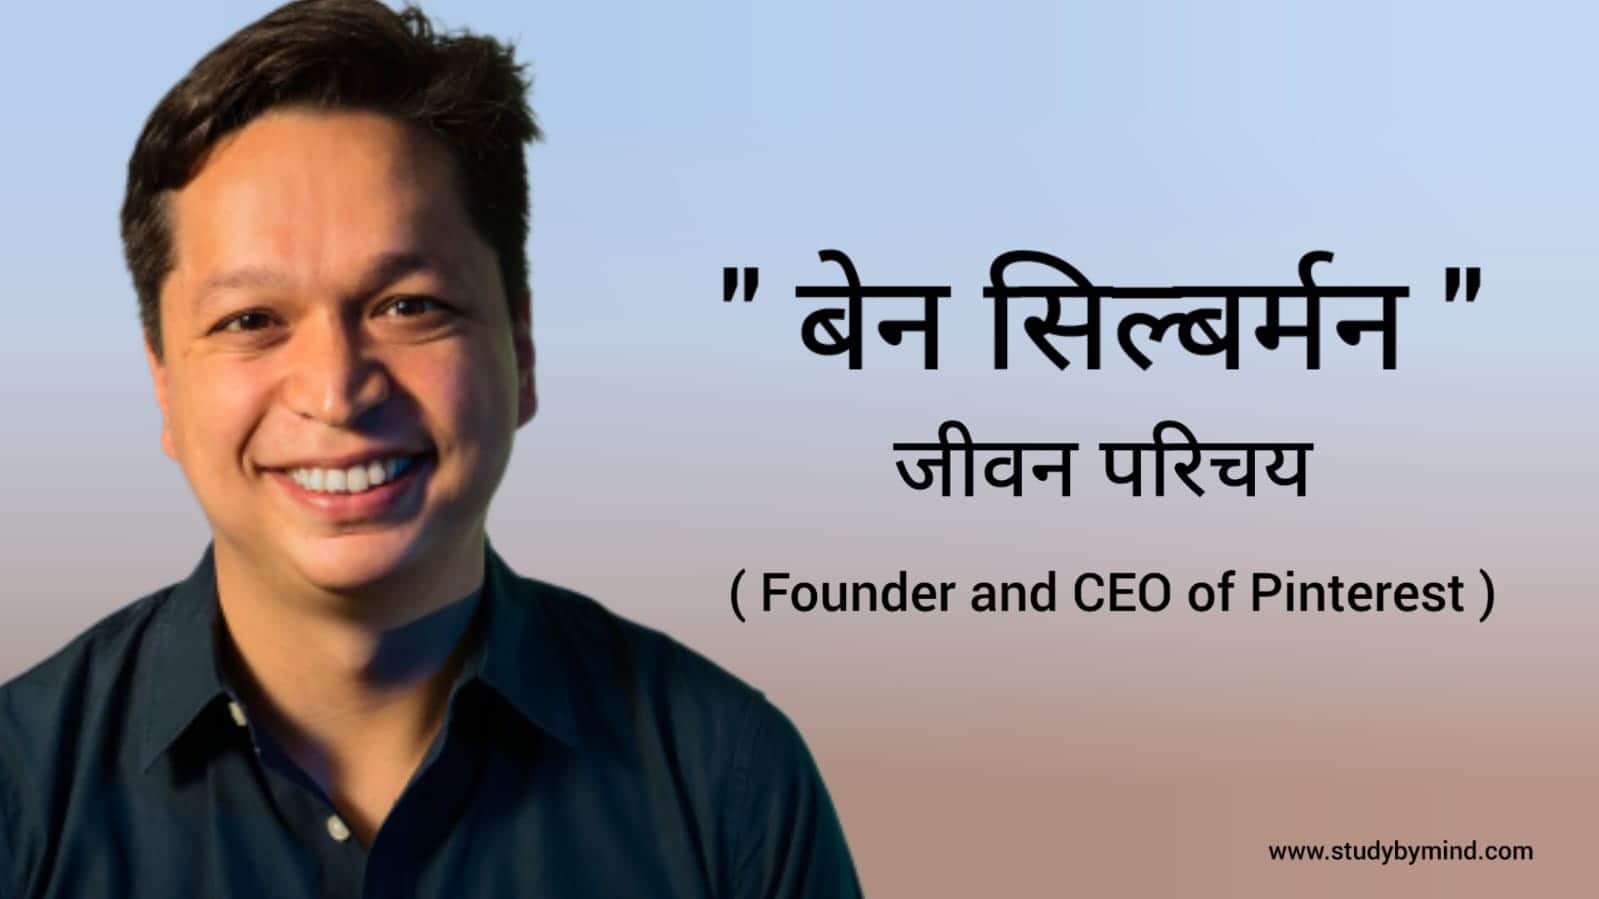 You are currently viewing बेन सिल्बर्मन जीवन परिचय Ben Silbermann biography in hindi ( Founder and Ceo of pinterest )